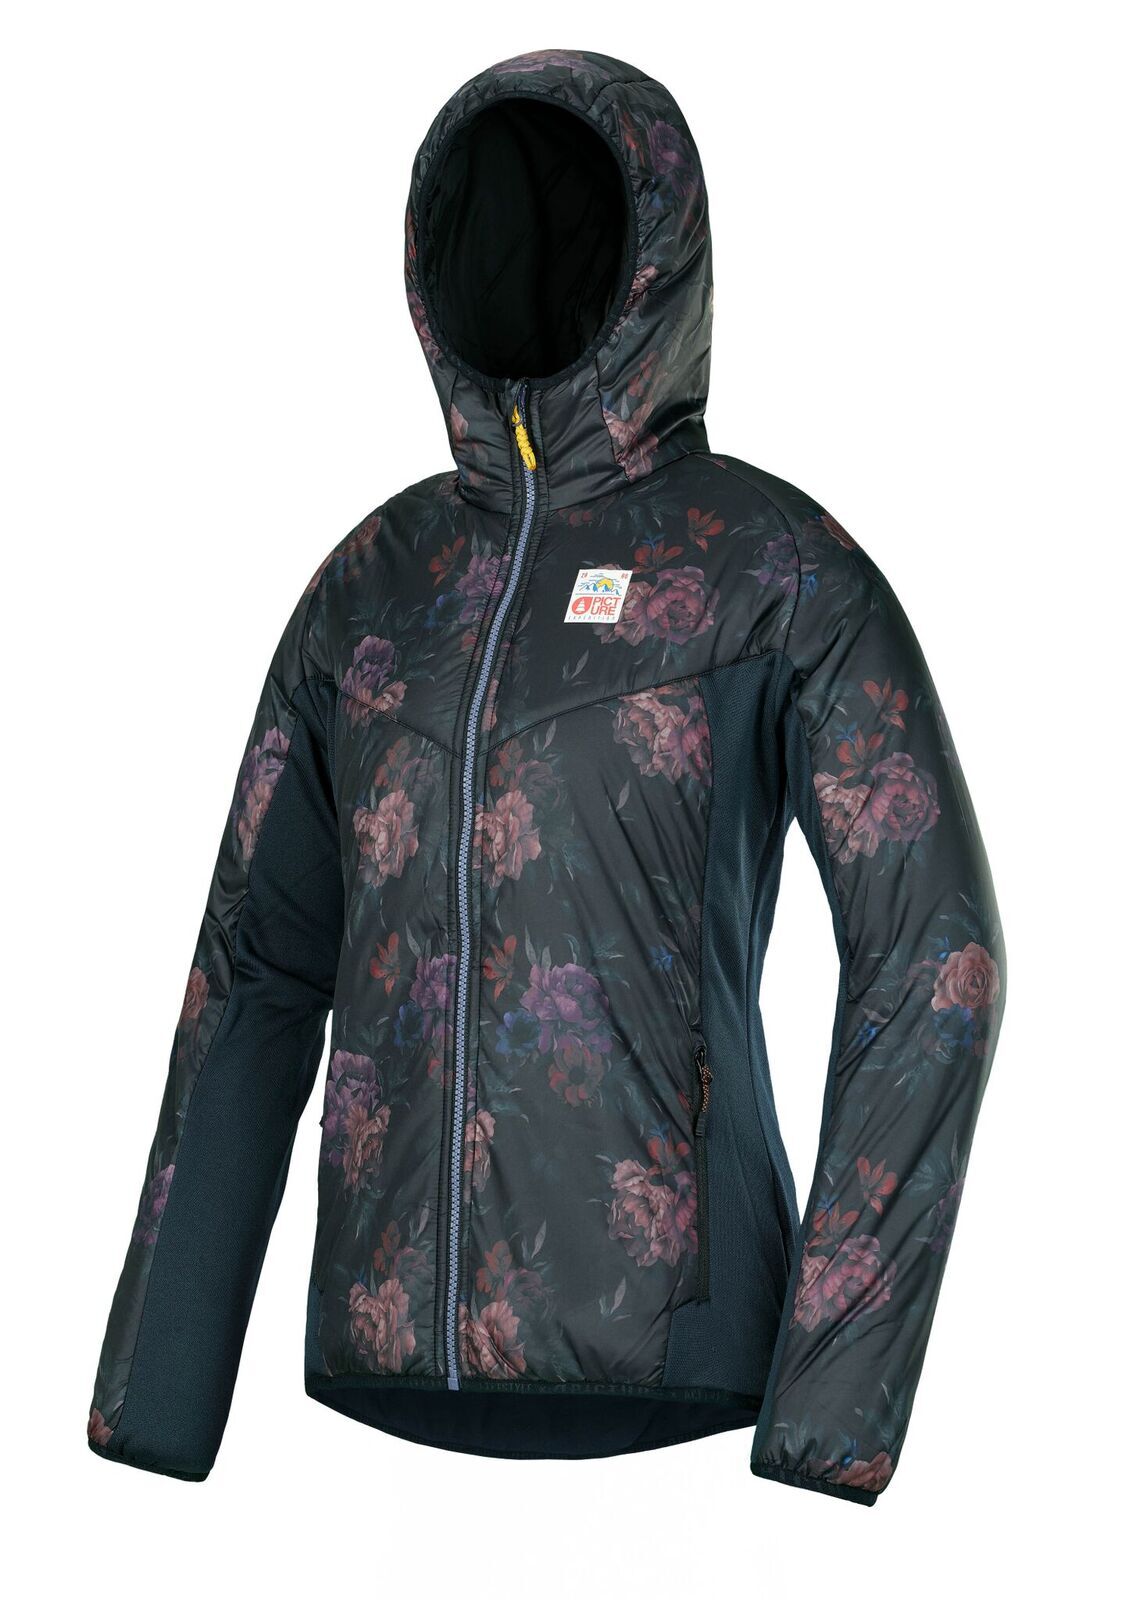 Picture Organic Clothing - Clea - Softshell Jacket - Women's